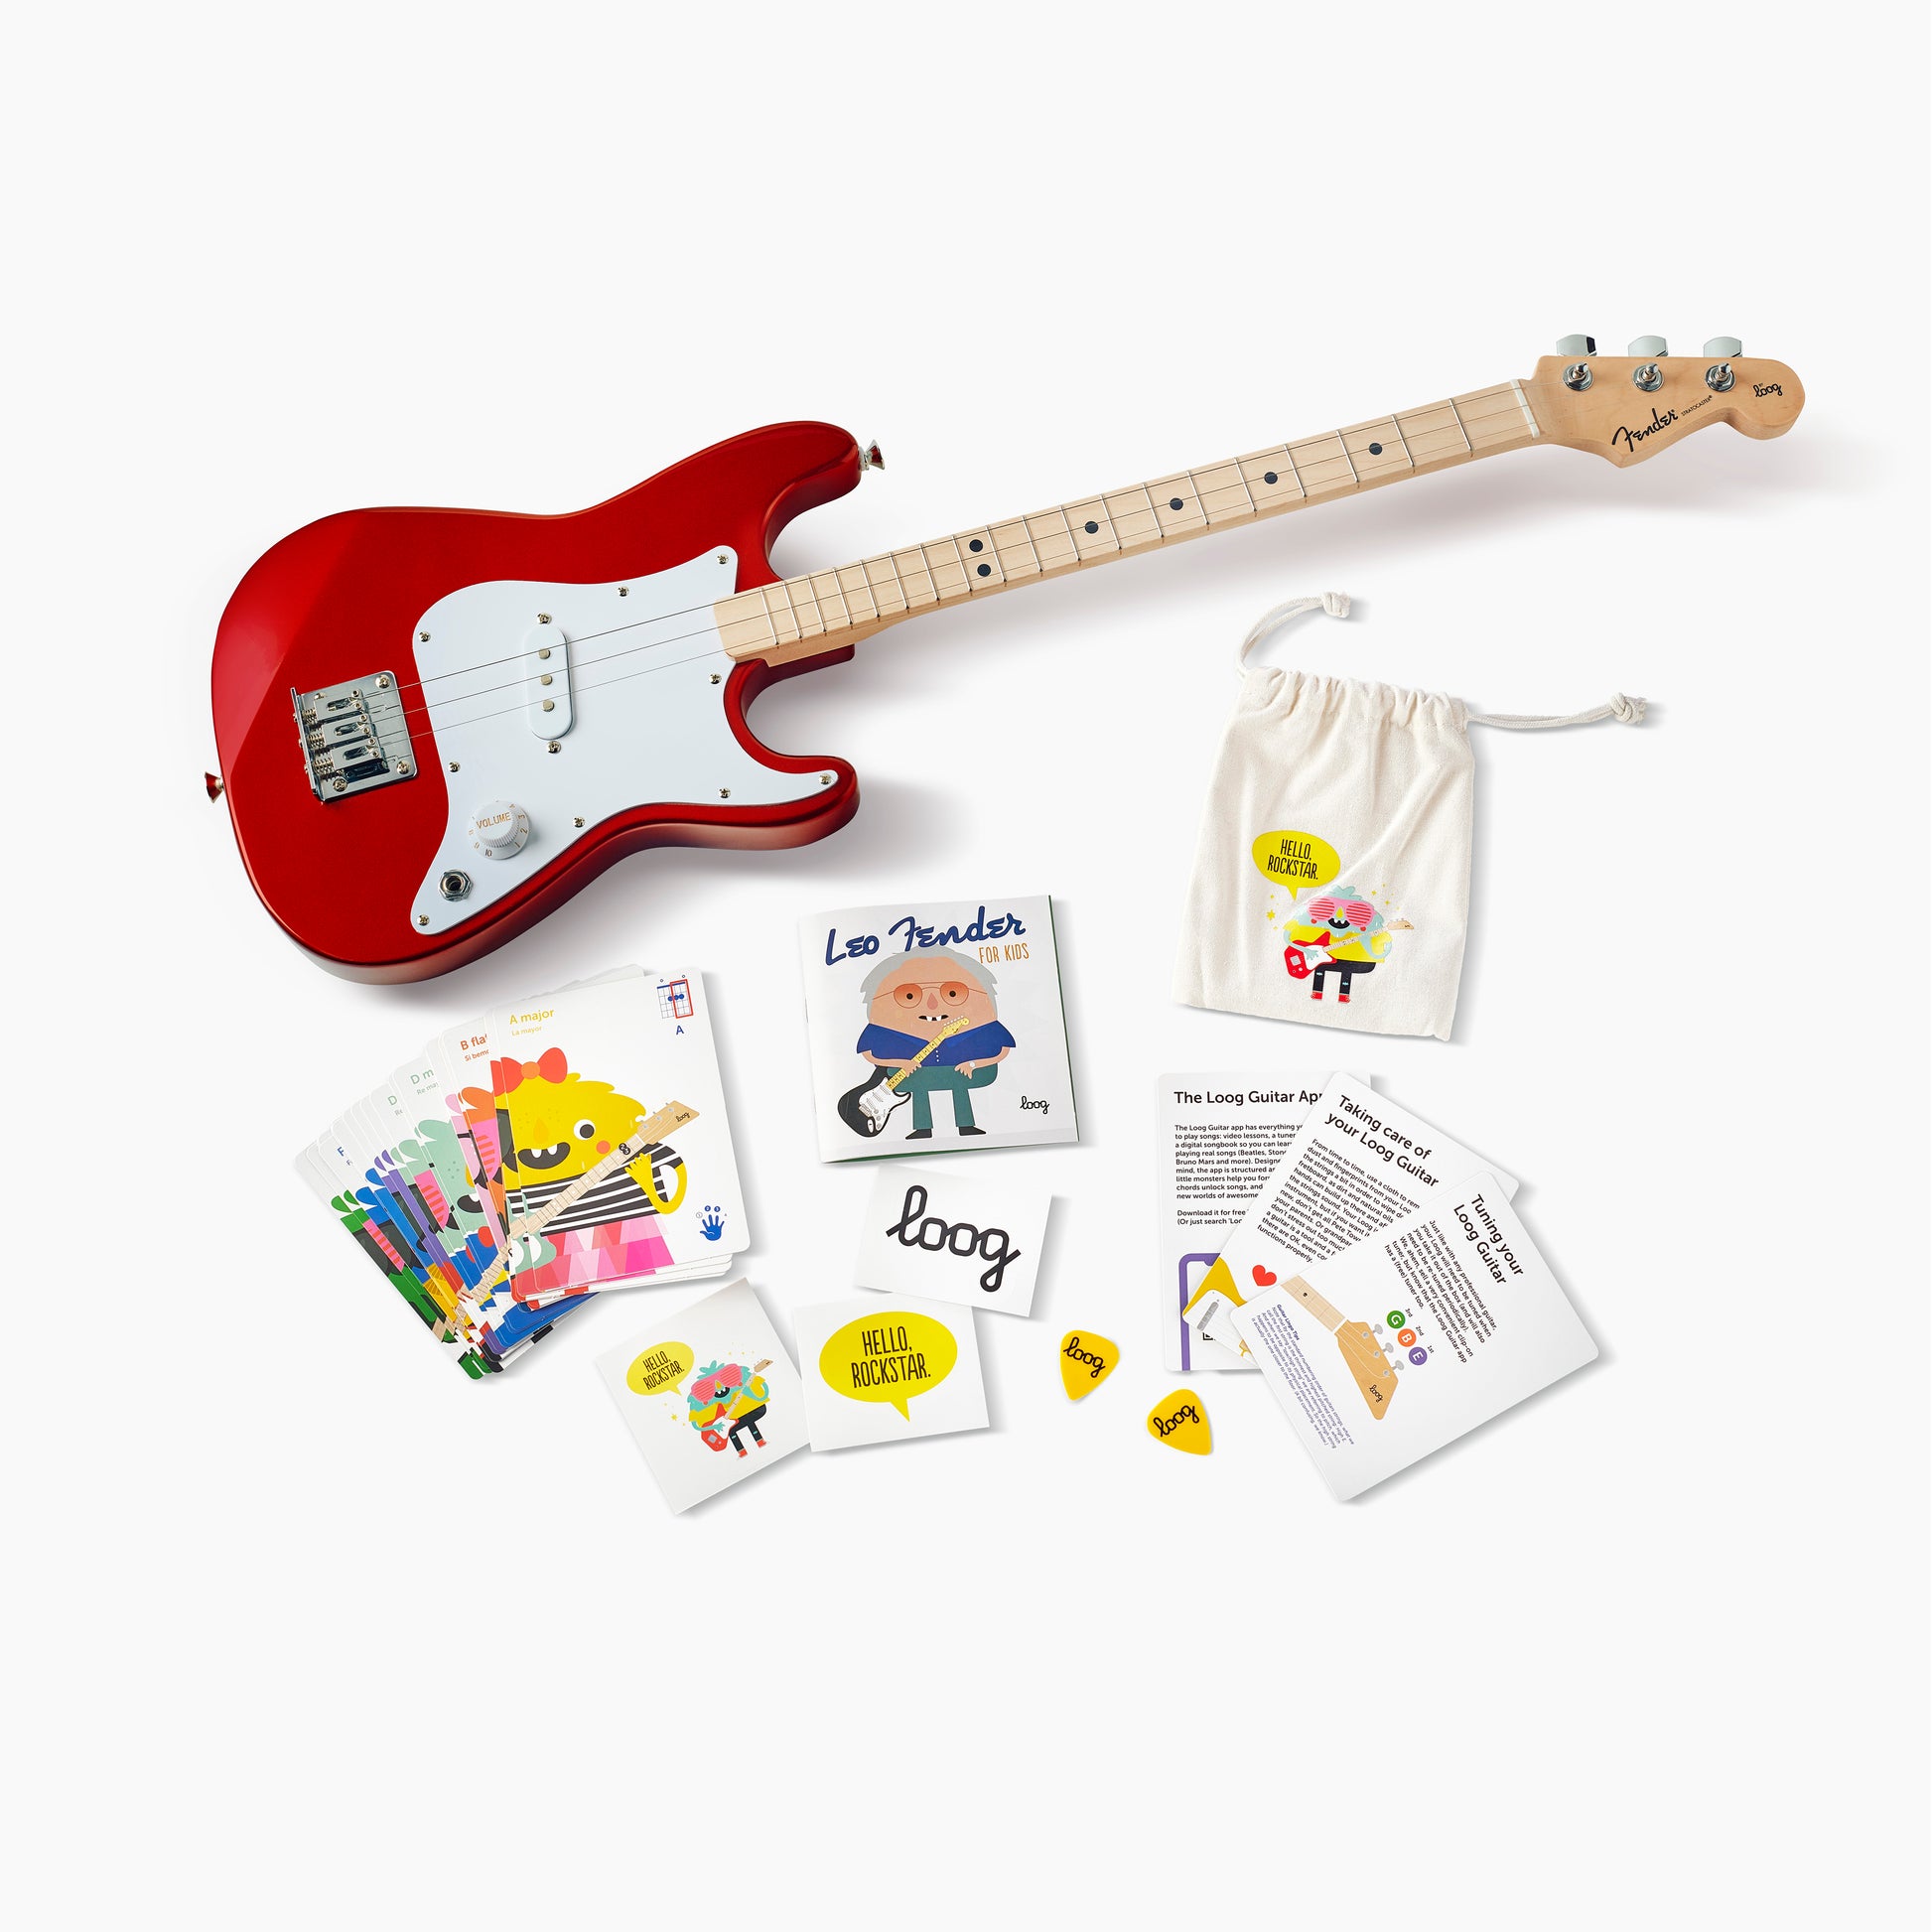 candy-apple-red stratocaster candy apple red candy-apple-red-stratocaster stratocaster-candy-apple-red